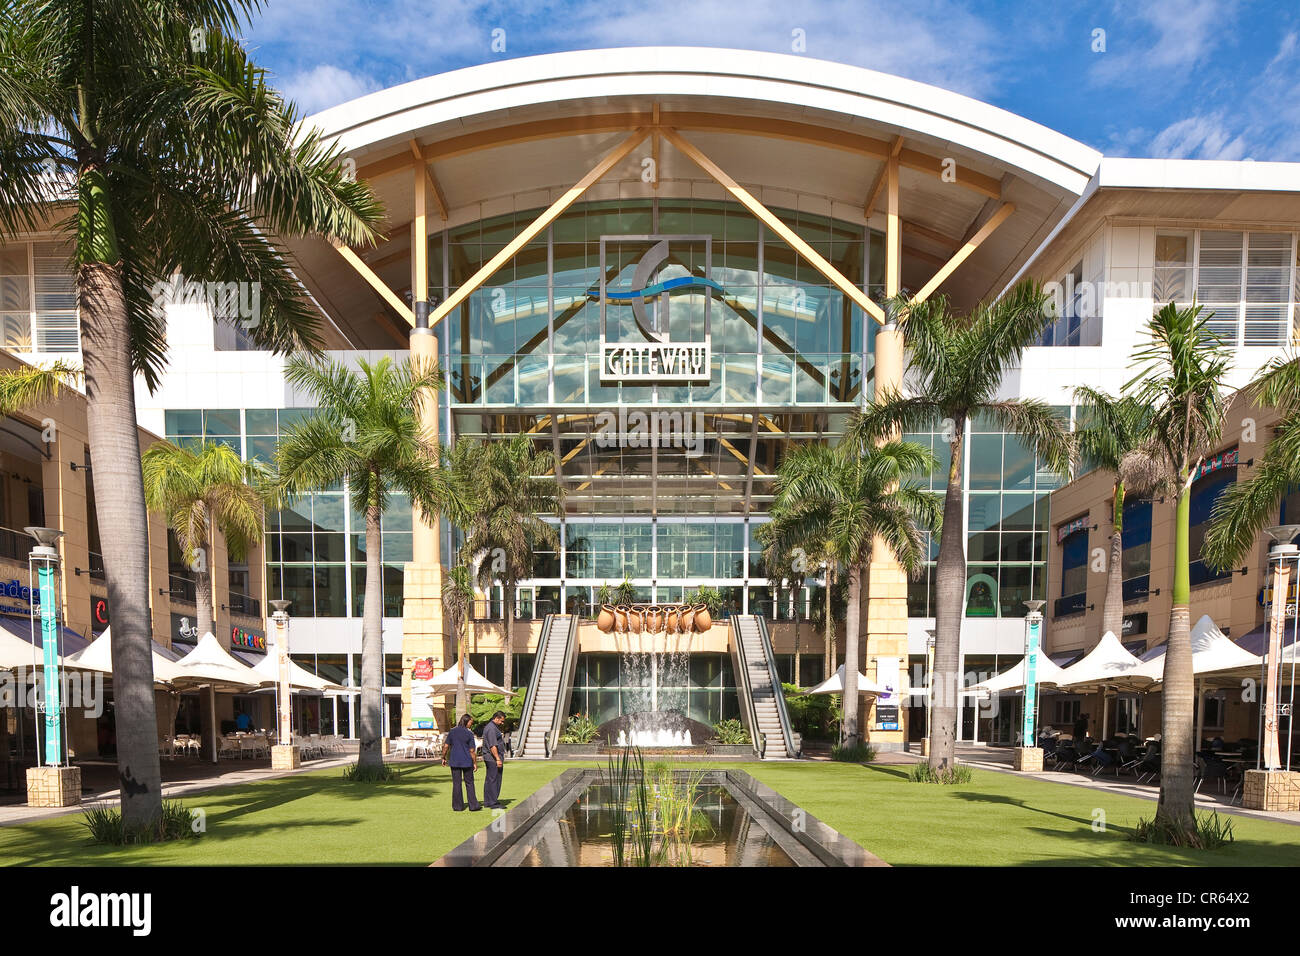 South Africa, Kwazulu Natal Province, Durban, Gateway Commercial Center Stock Photo